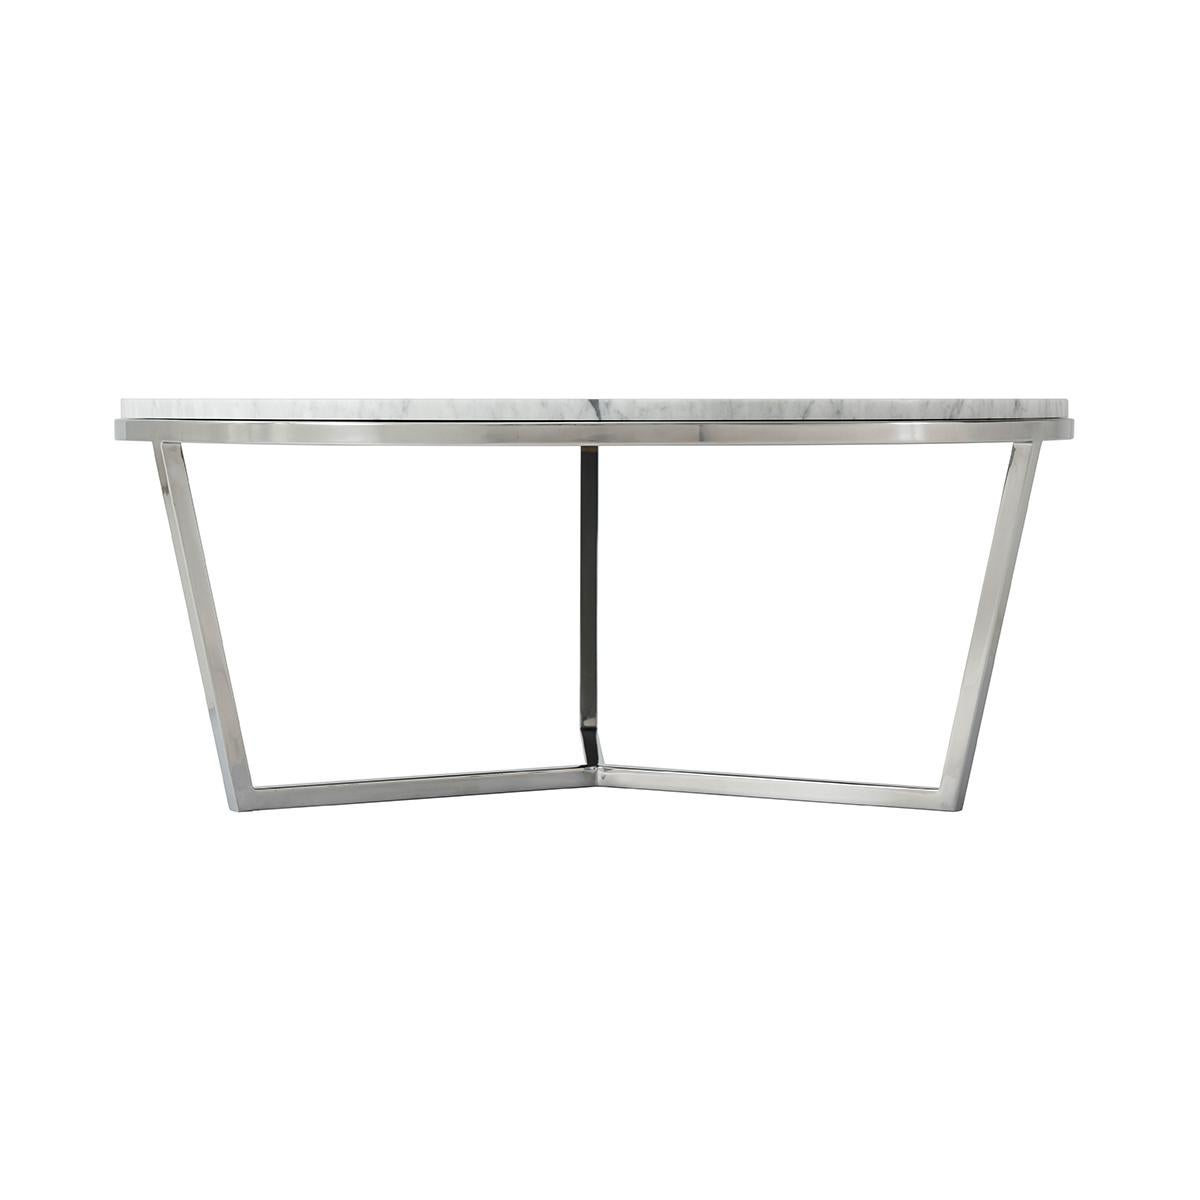 A small marble top coffee table on a polished nickel base with a stepped edge. The circular Bianco Carrara marble top sits on a modern polished three leg base.

Dimensions: 35.5